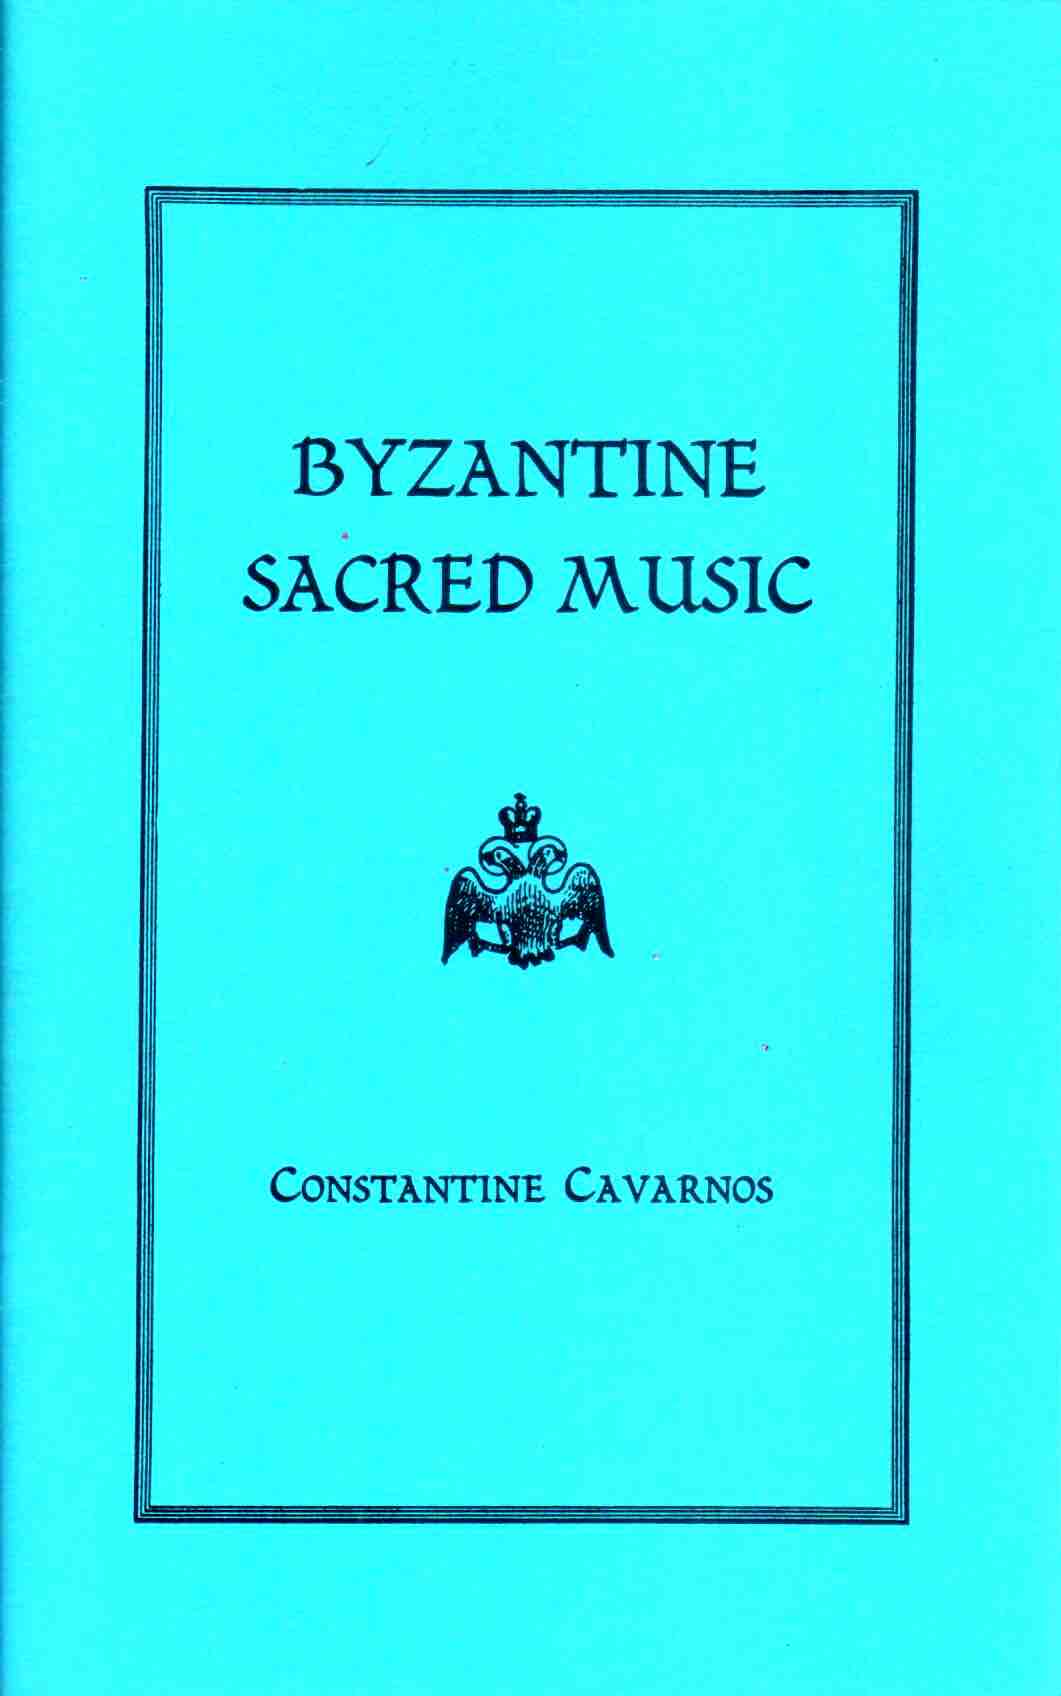 Cover of Byzantine Sacred Music